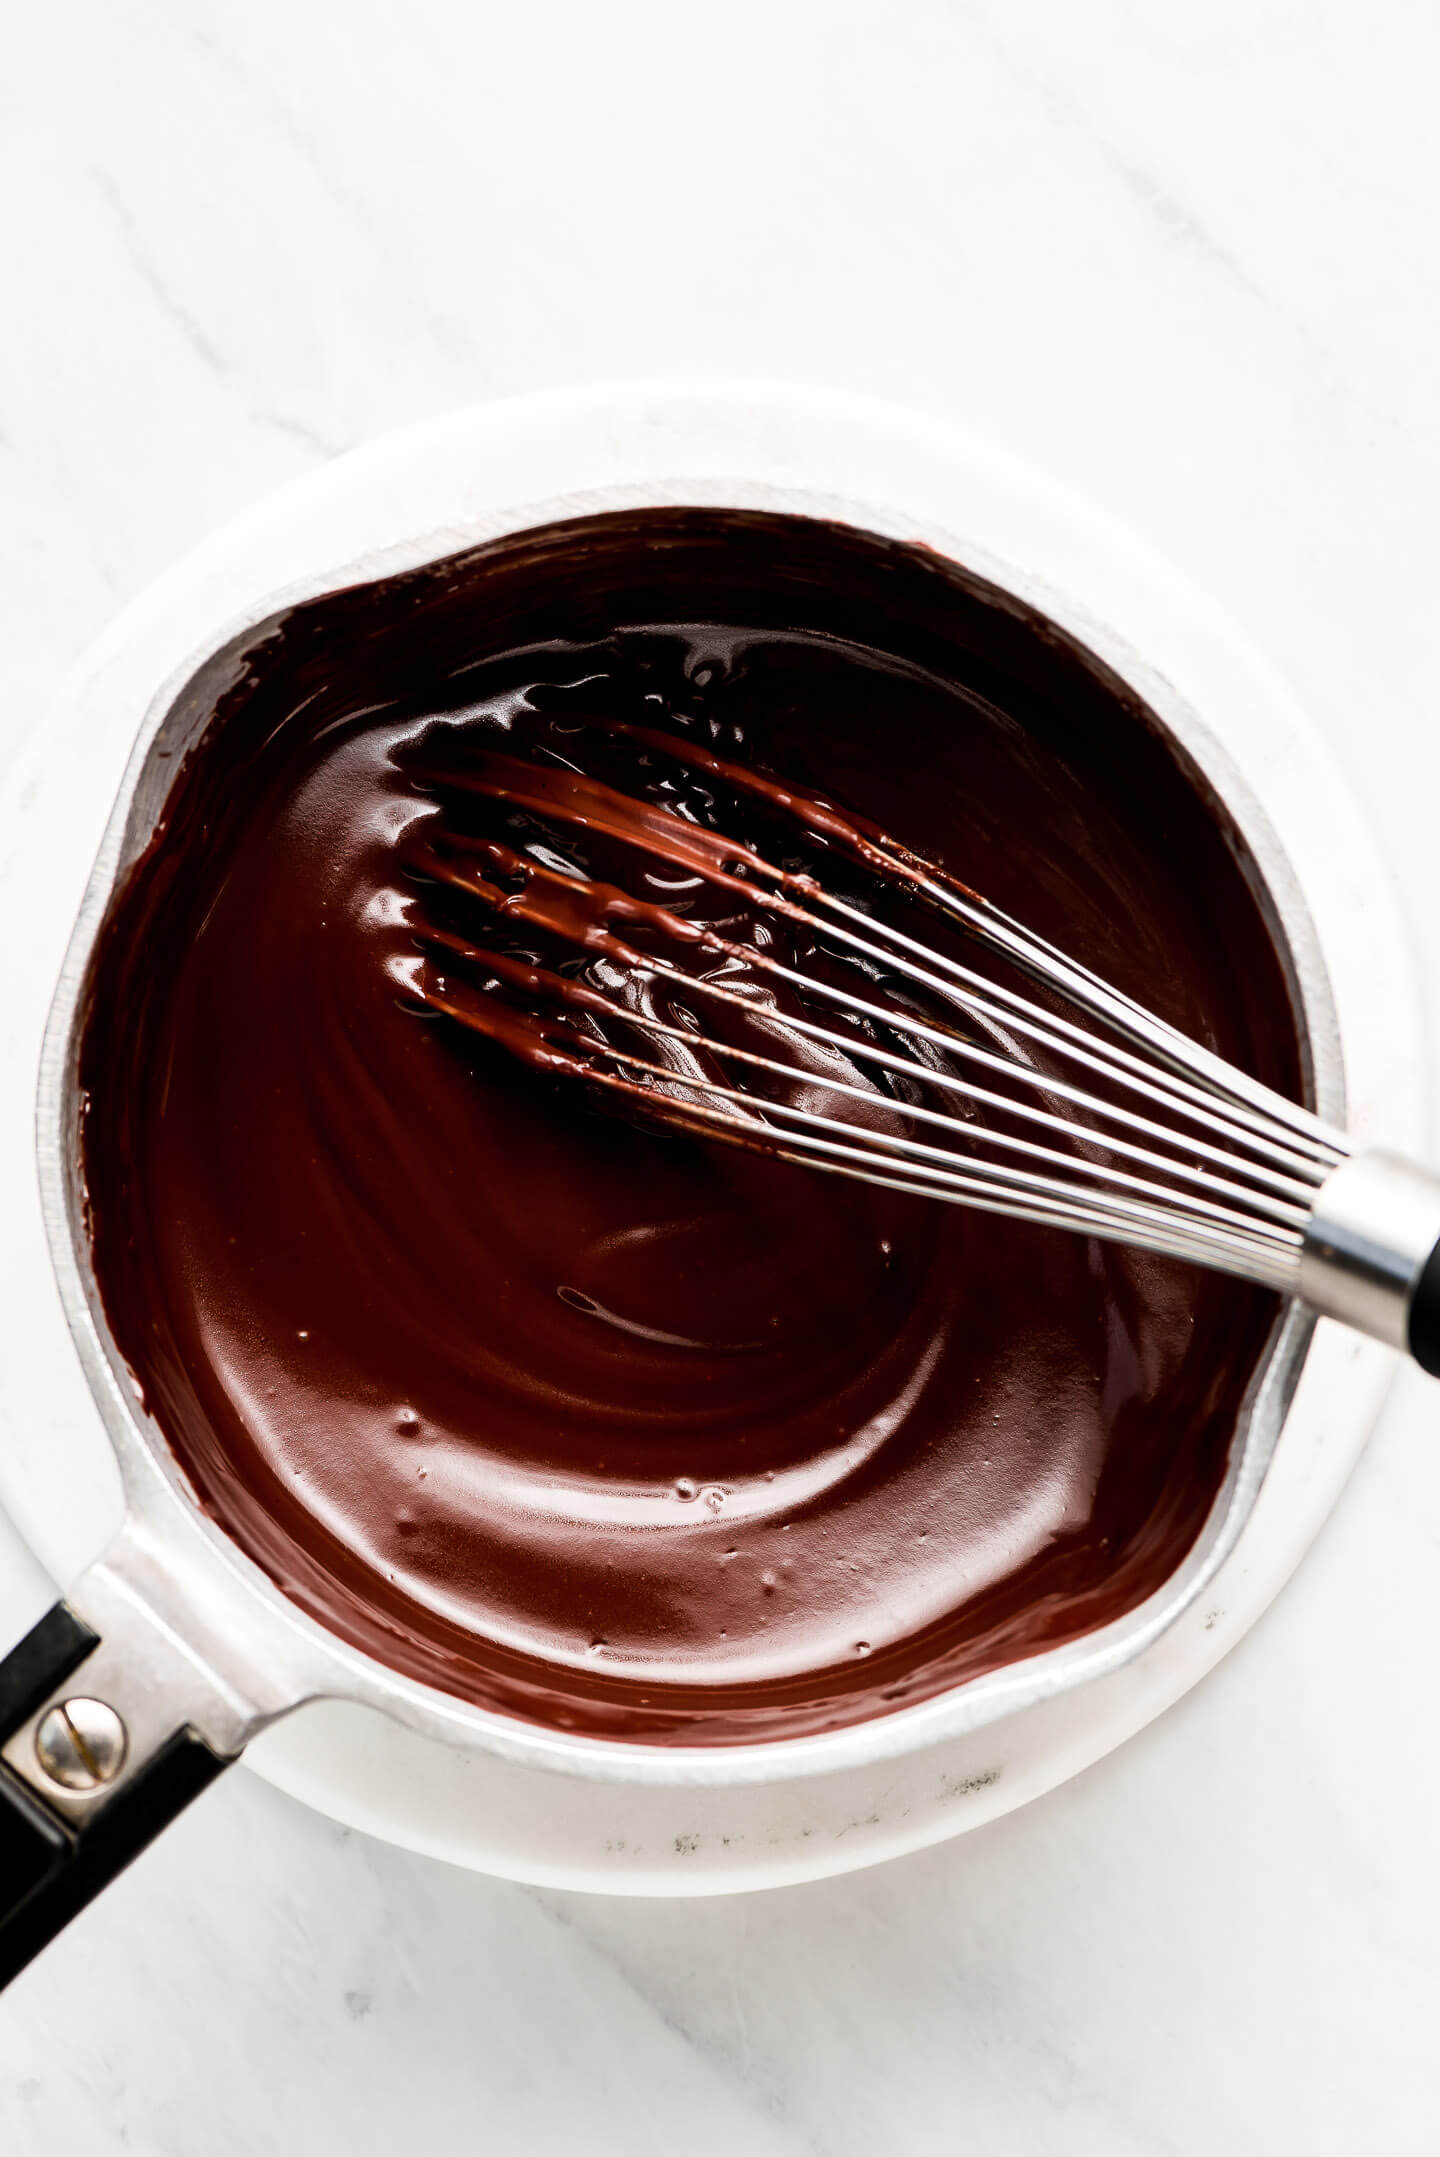 A whisk in a pot of hot fudge sauce.